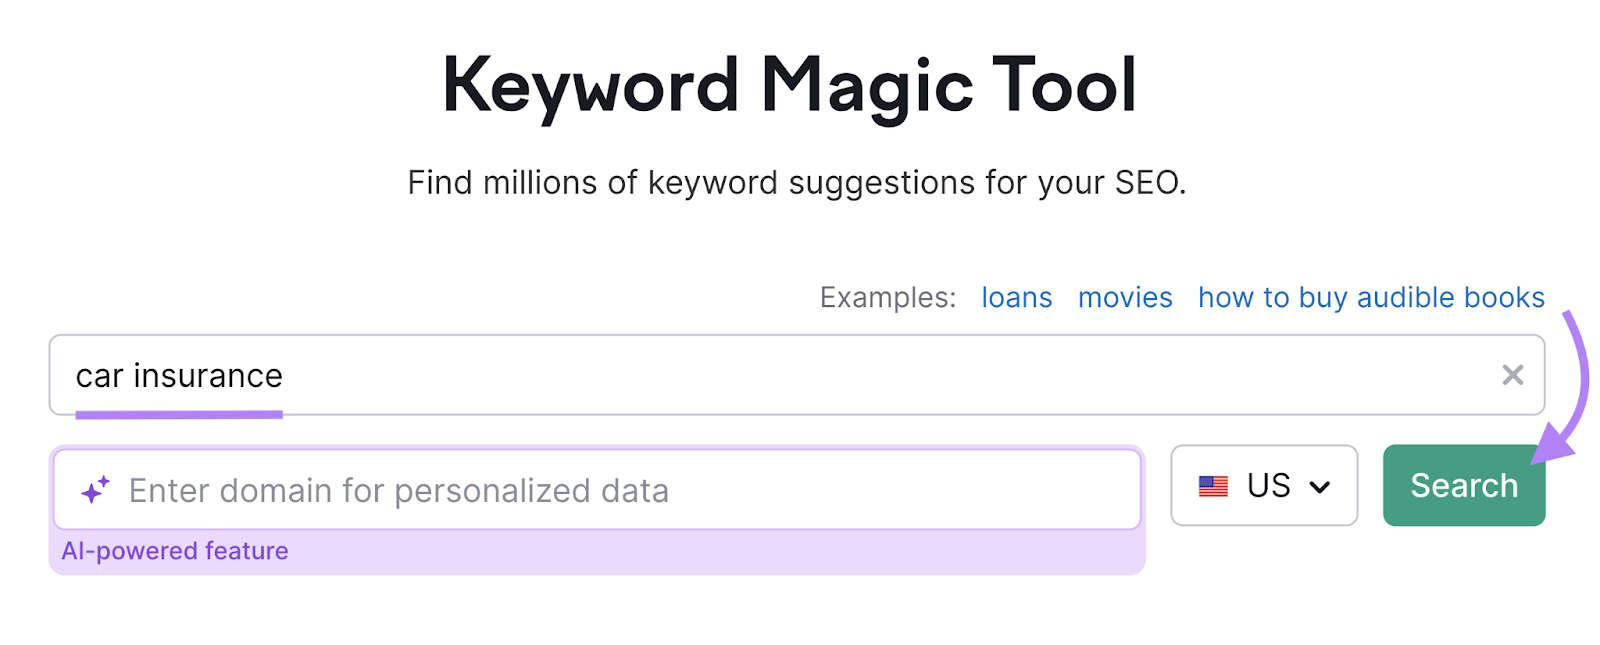 search for car insurance in keyword magic tool